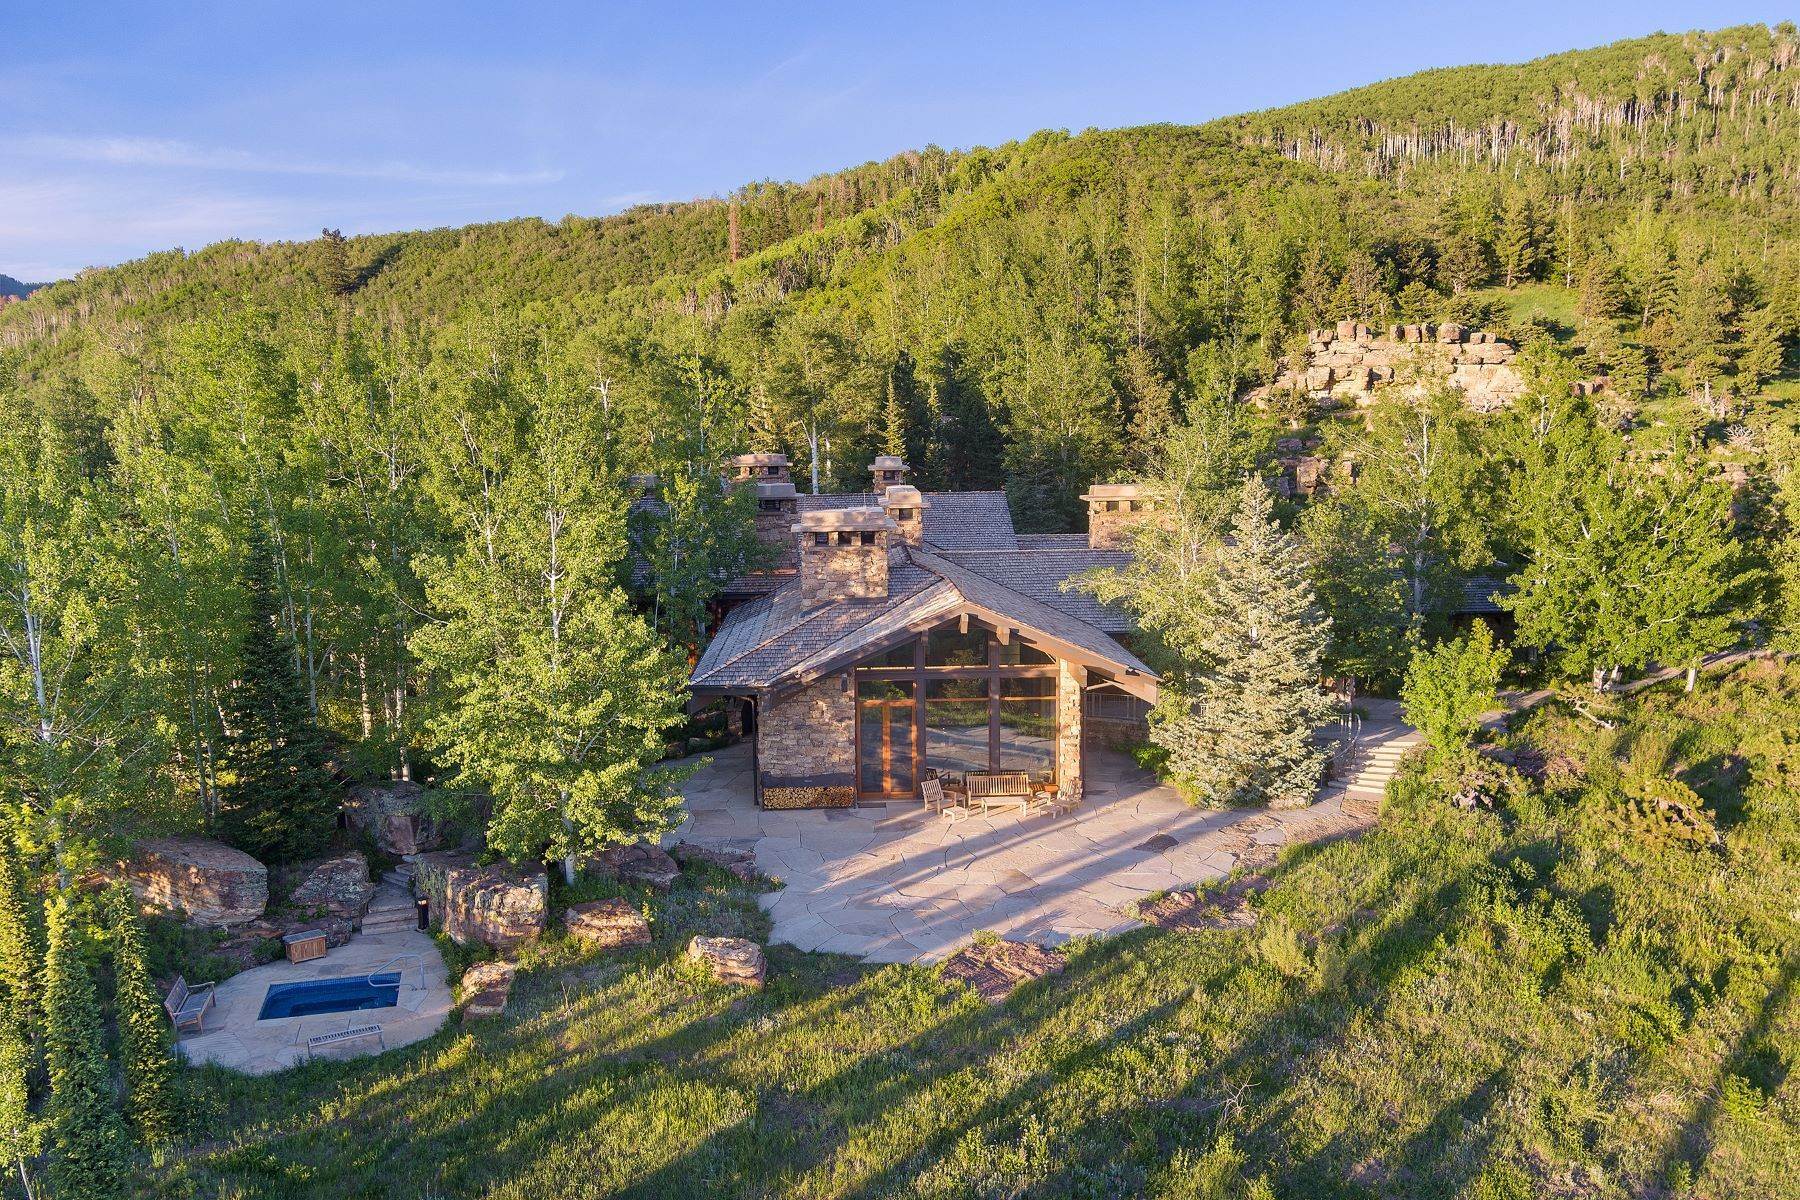 Single Family Homes for Sale at Carroll Drive Properties 1020, 300, 310, 314 Carroll Drive Aspen, Colorado 81611 United States